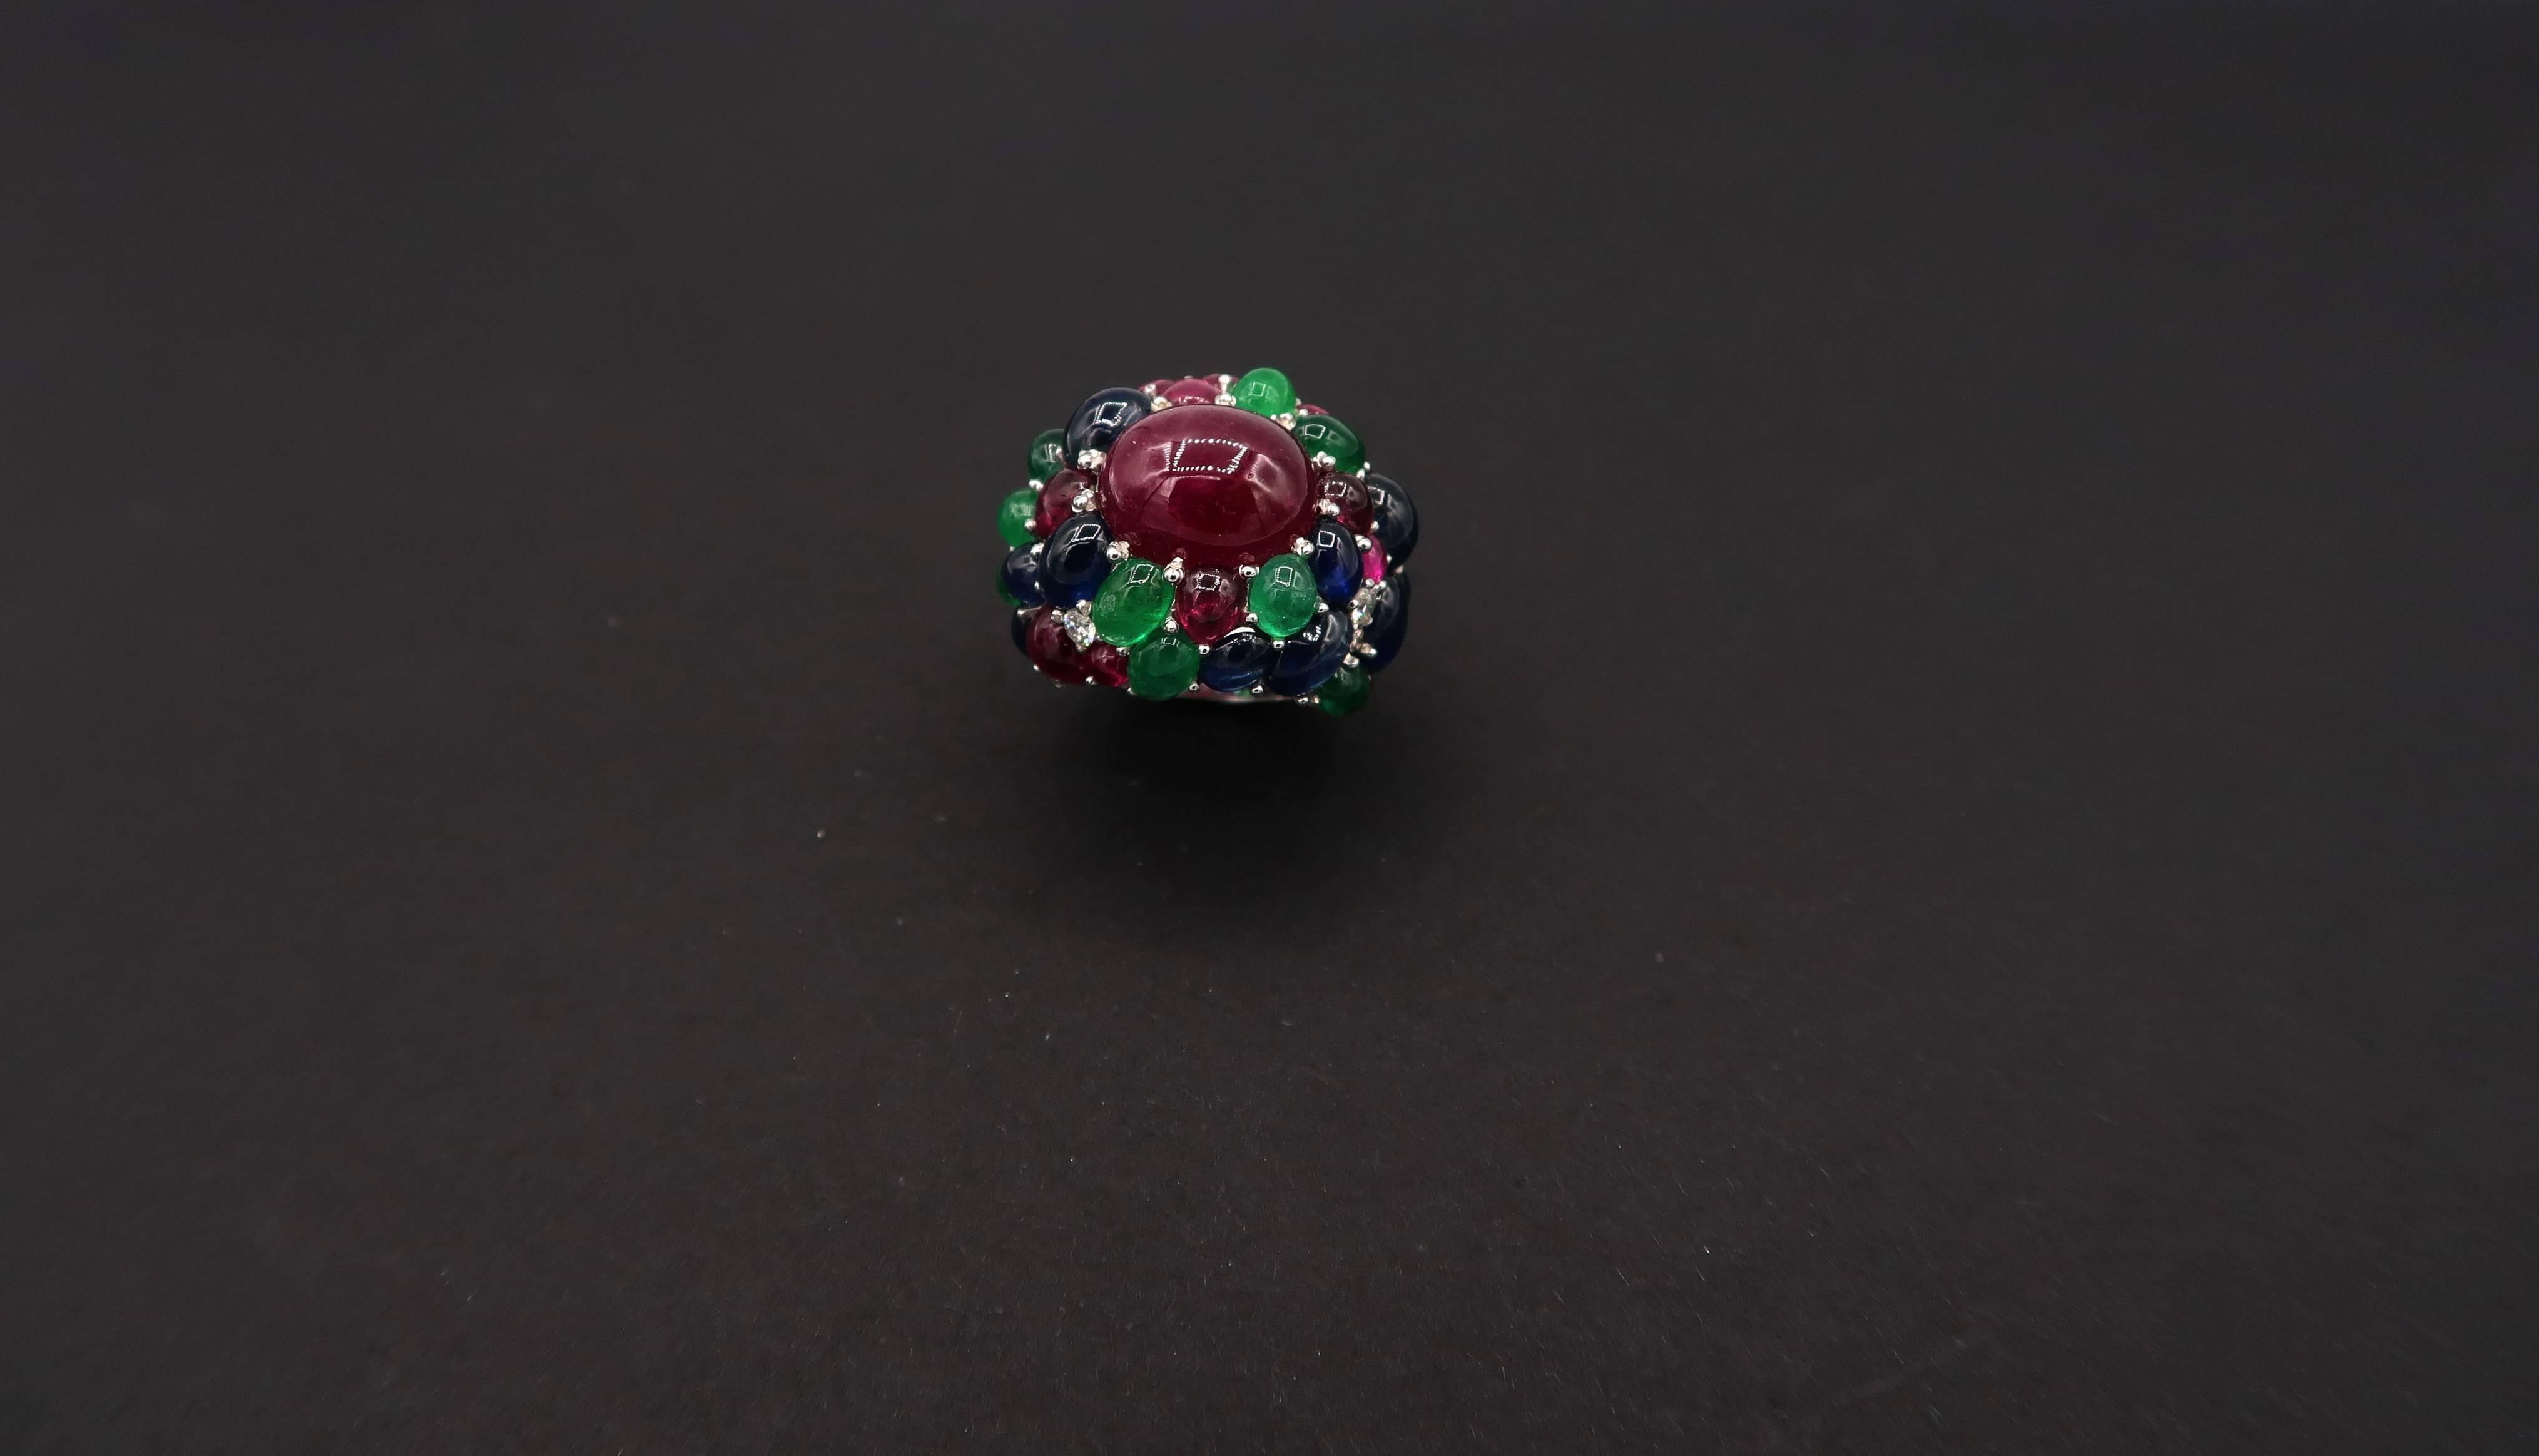 Cabochon Ruby Ring in 18K White Gold Setting Embellished with Cabochon Emerald, Cabochon Rubies, Cabochon Sapphire and Diamonds

We offer a one-time complimentary resizing service for this ring. Should you wish to have the ring resized, please